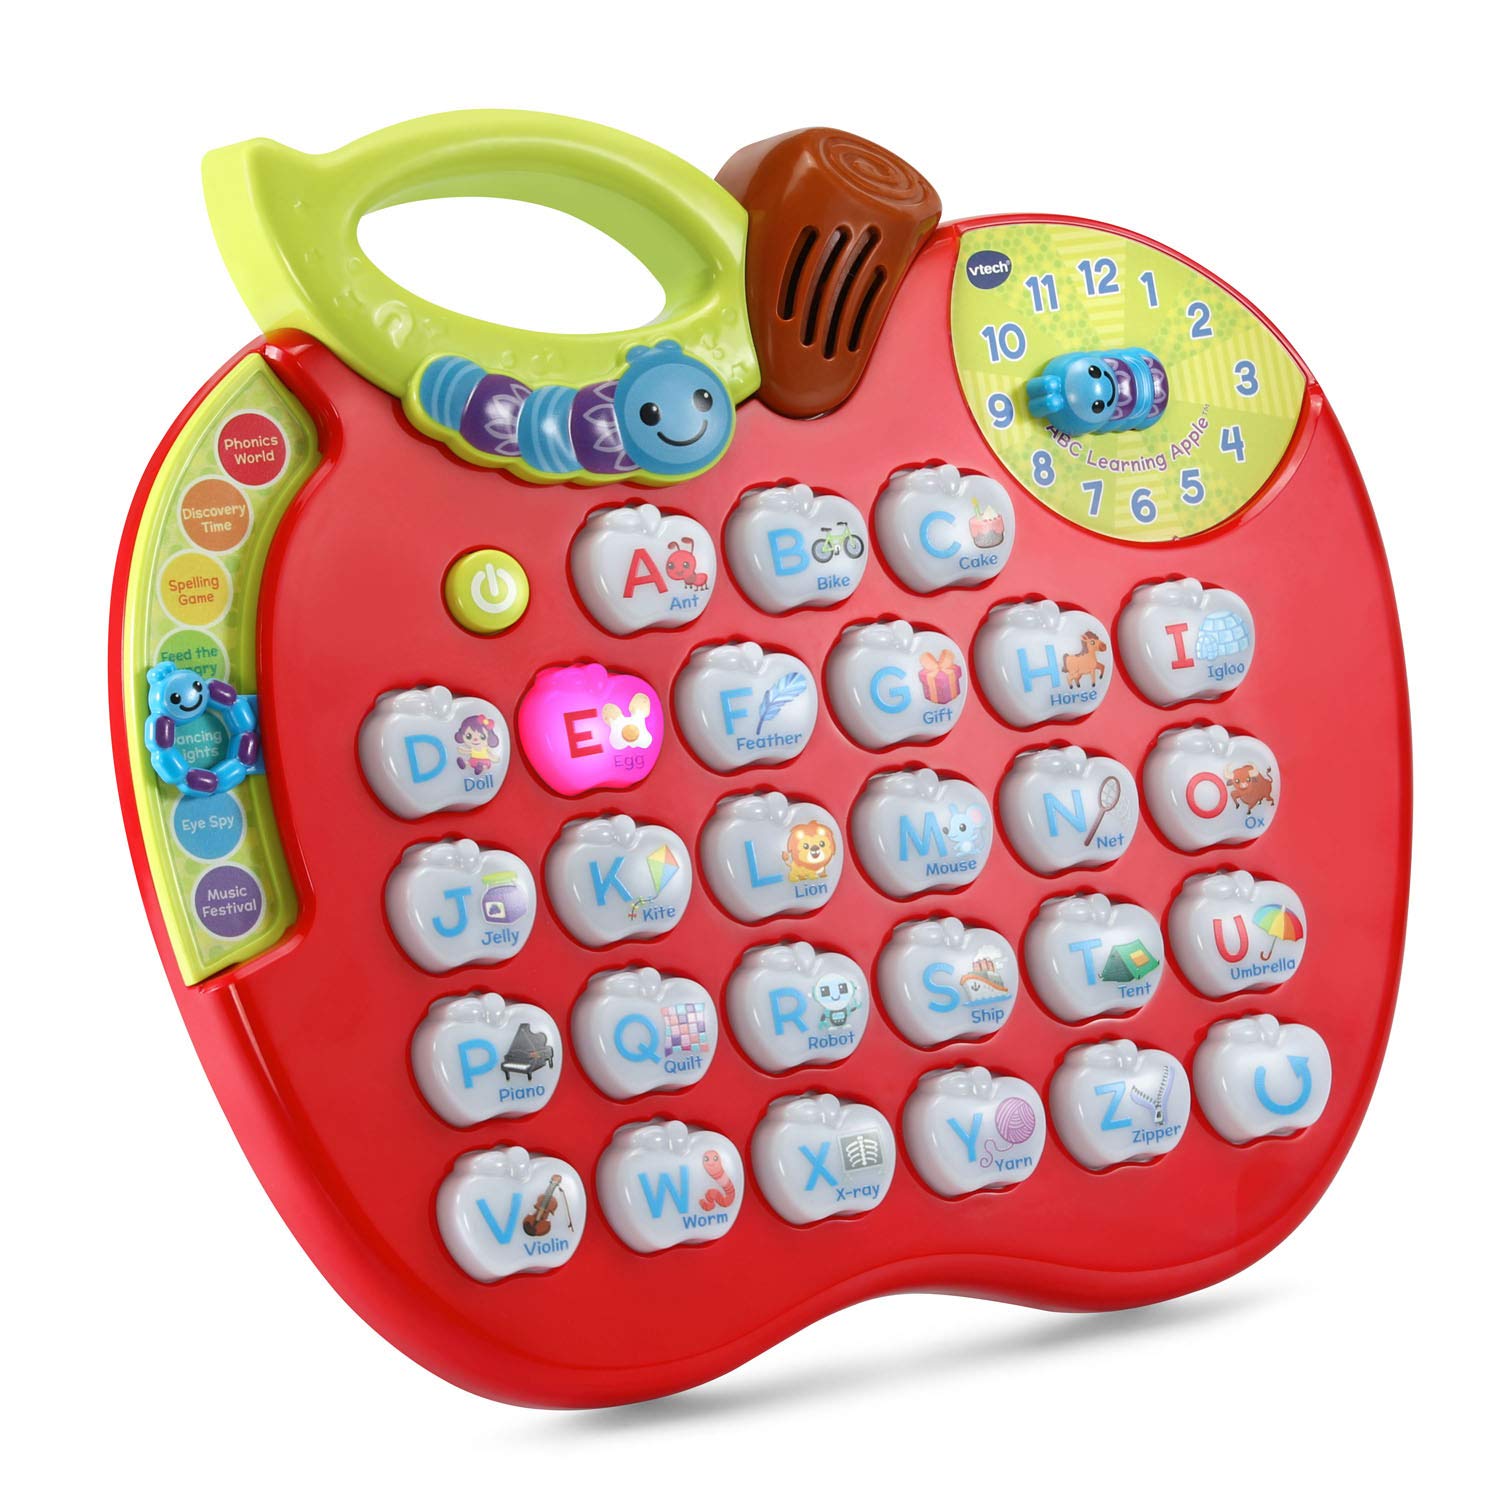 VTech ABC Learning Interactive Apple w/ Lights & Sounds (Red) $15.89 + Free Shipping w/ Prime or on $35+